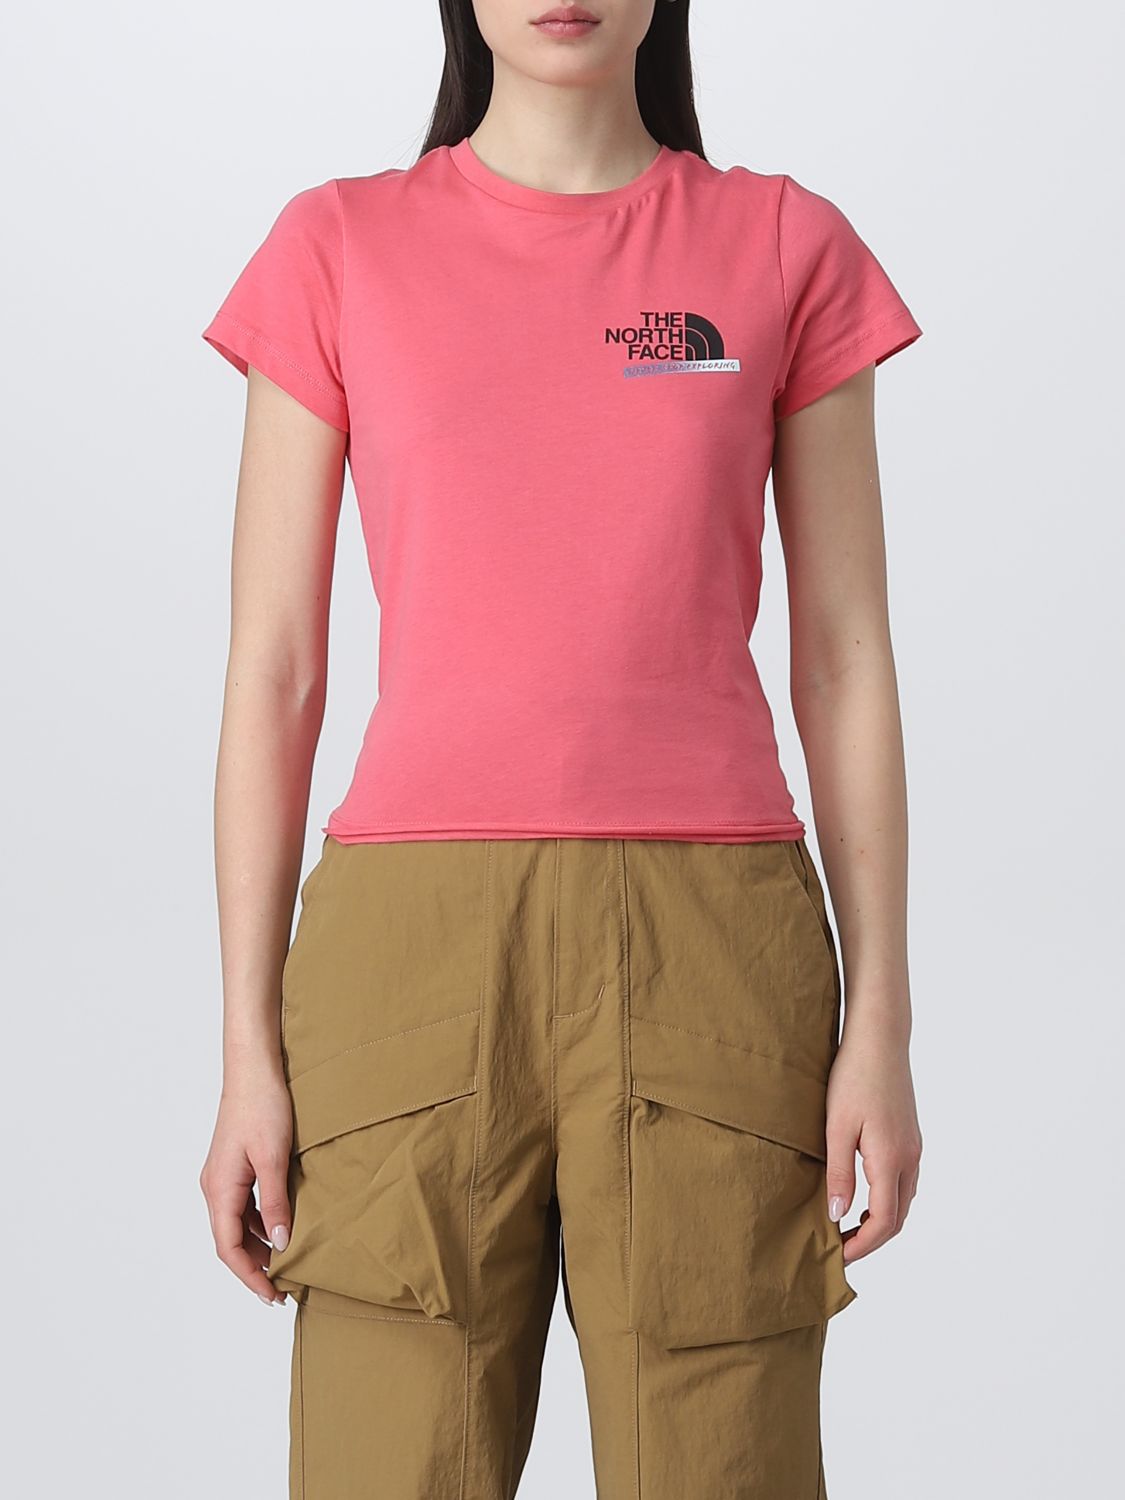 THE NORTH FACE T-SHIRT THE NORTH FACE WOMAN,E04751010